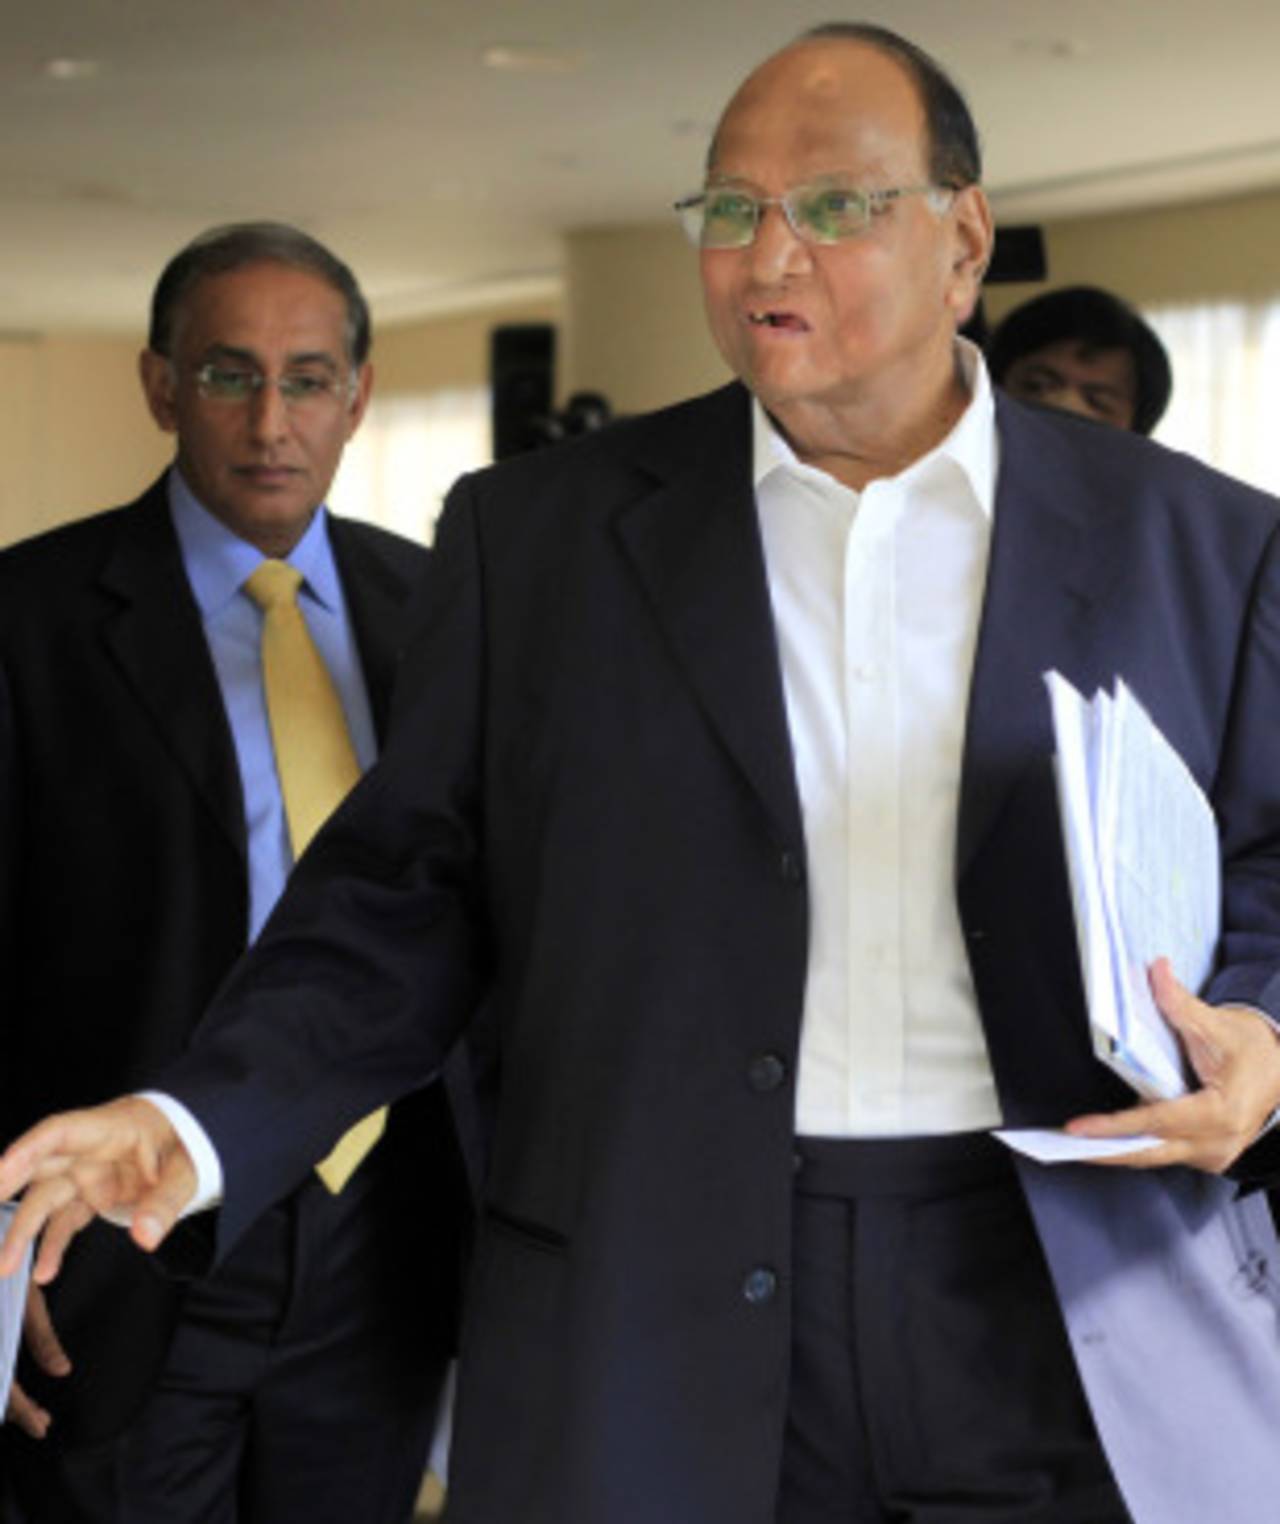 Sharad Pawar: "It is not in the hands of the cricket boards. It is a diplomatic issue."&nbsp;&nbsp;&bull;&nbsp;&nbsp;Associated Press